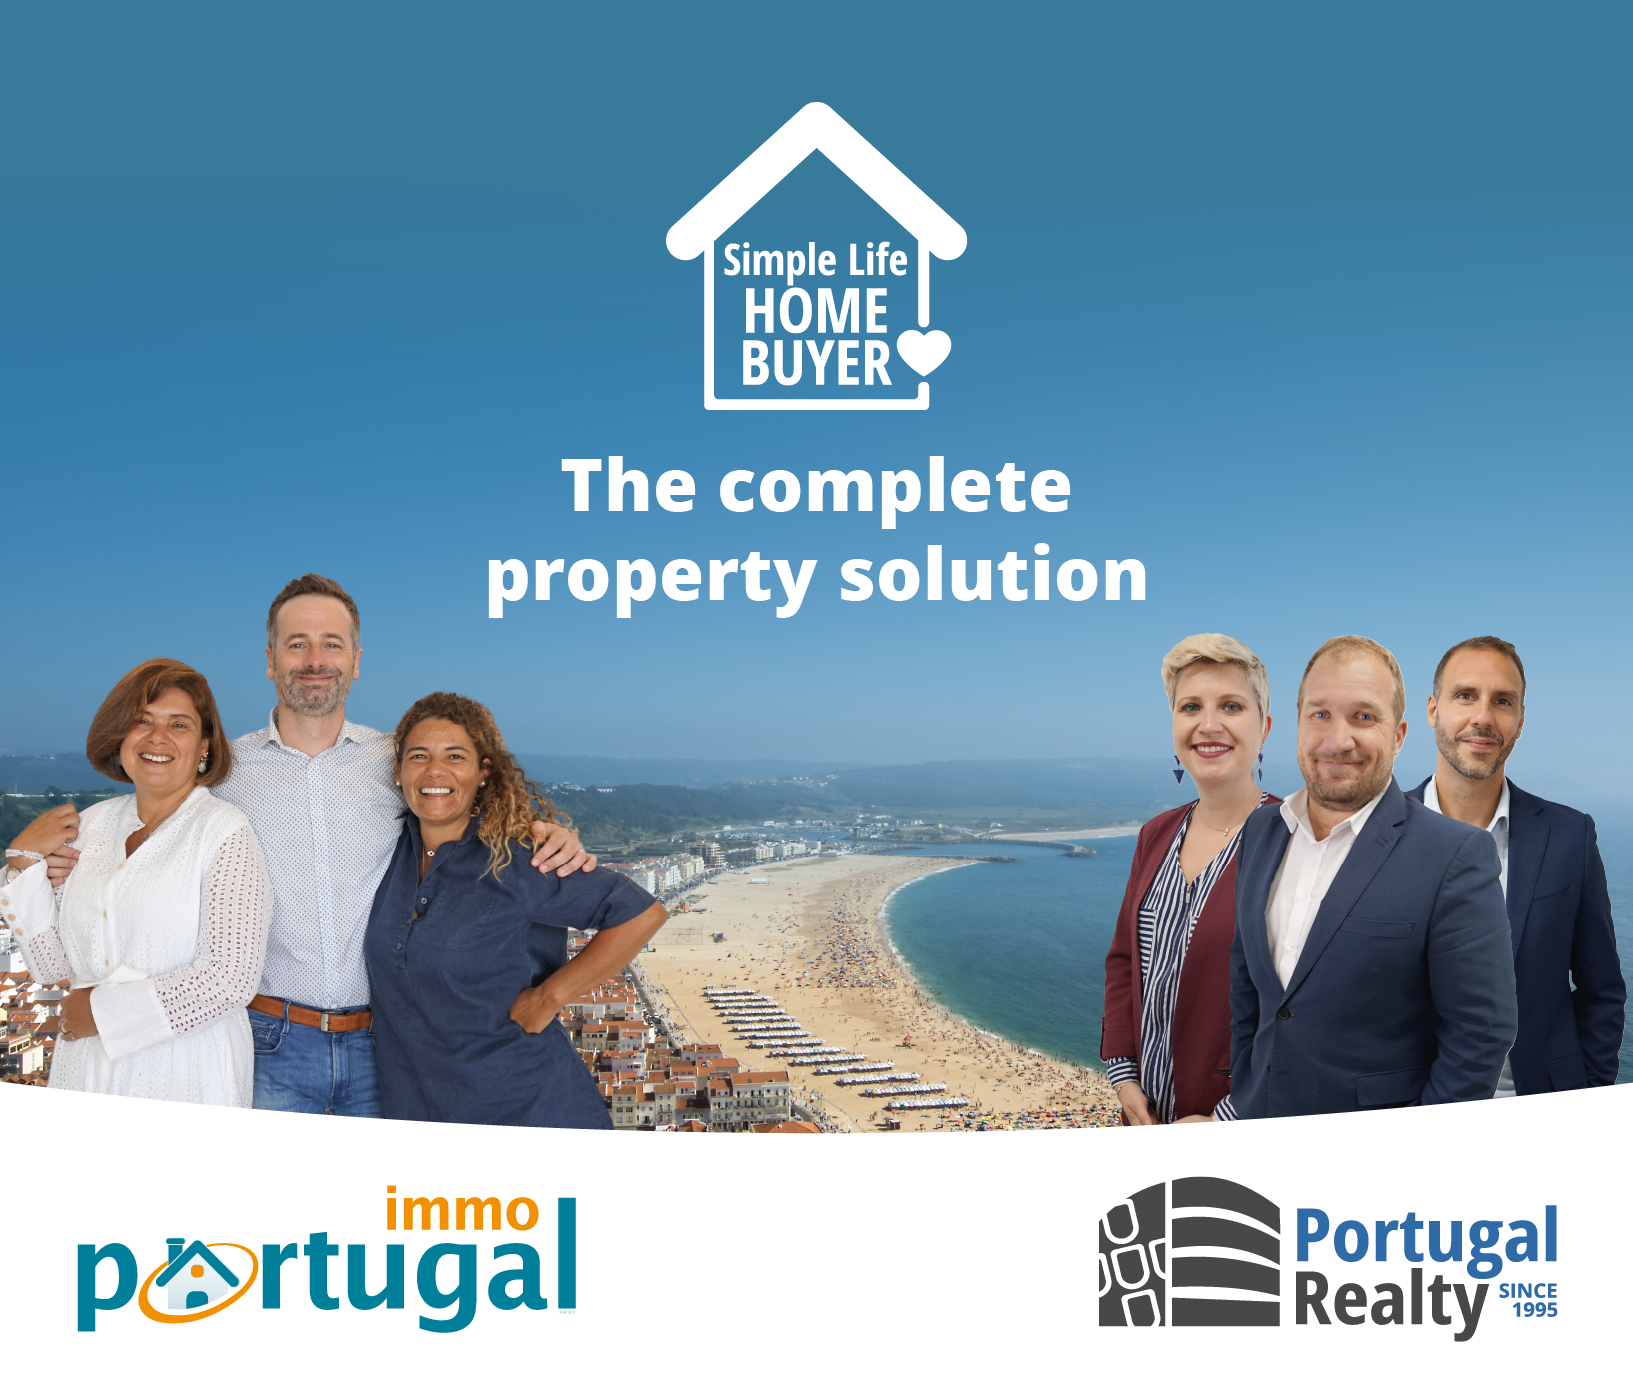 Portugal Realty I ImmoPortugal - Agent Contact